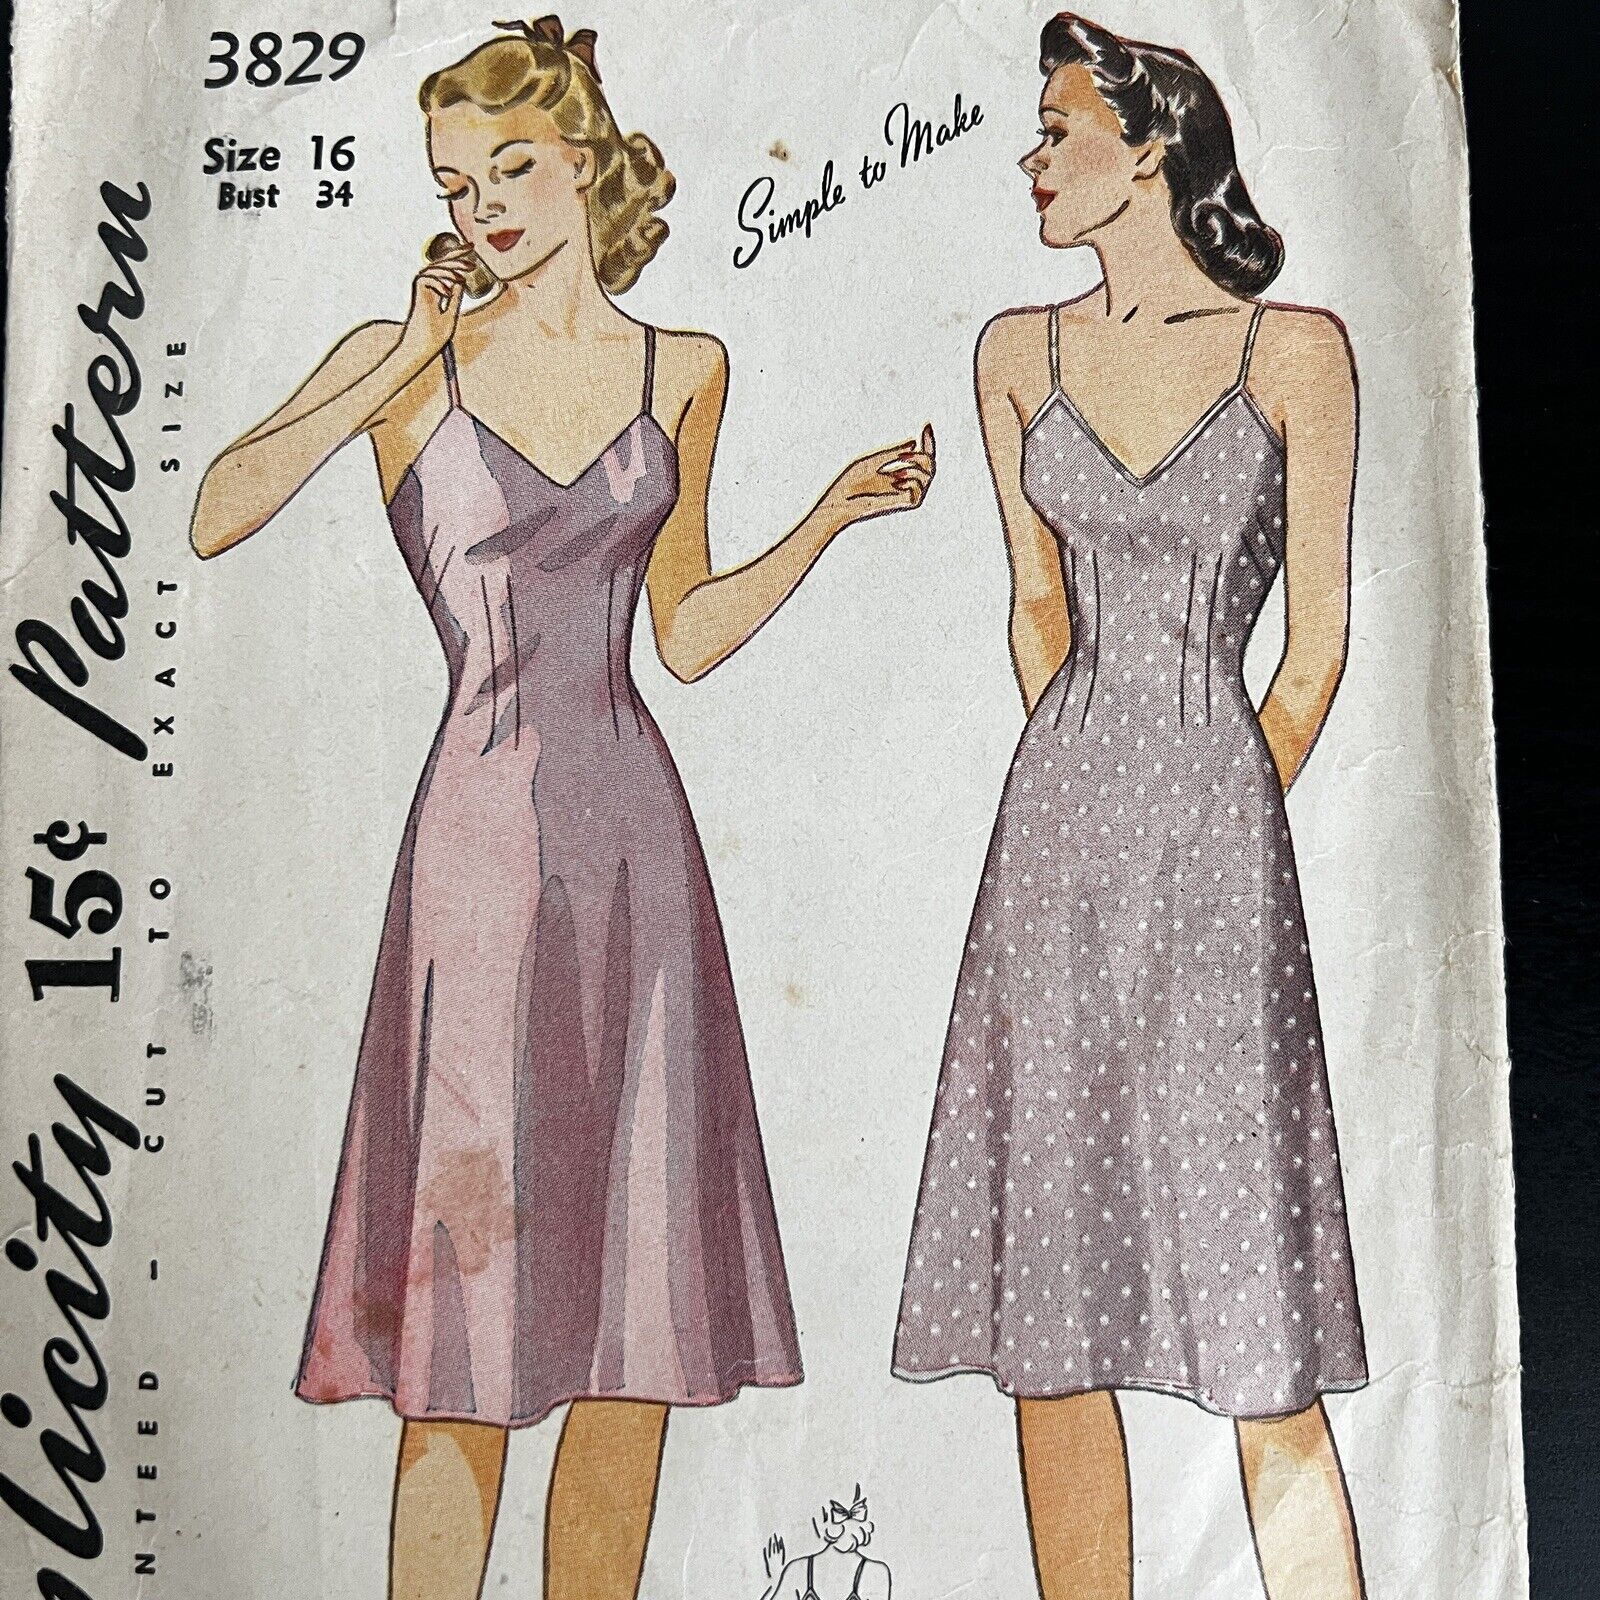 Vintage 1940s Simplicity 3829 Glam Pinup Bias Slip Sewing Pattern 16 Small USED